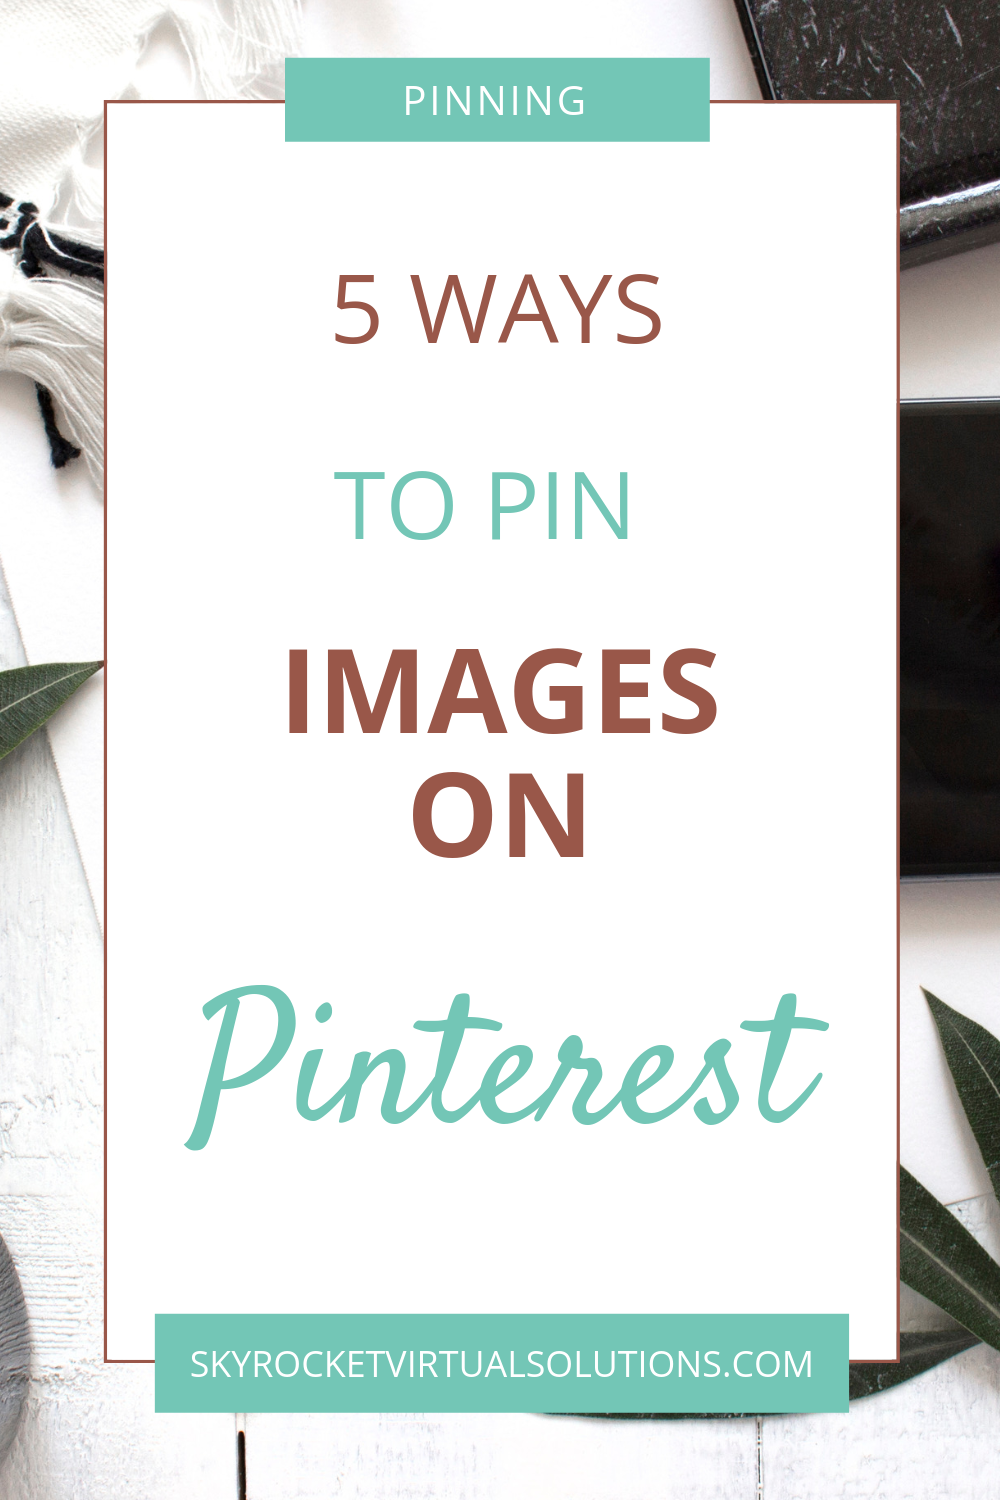 Pinning Images On Pinterest).png